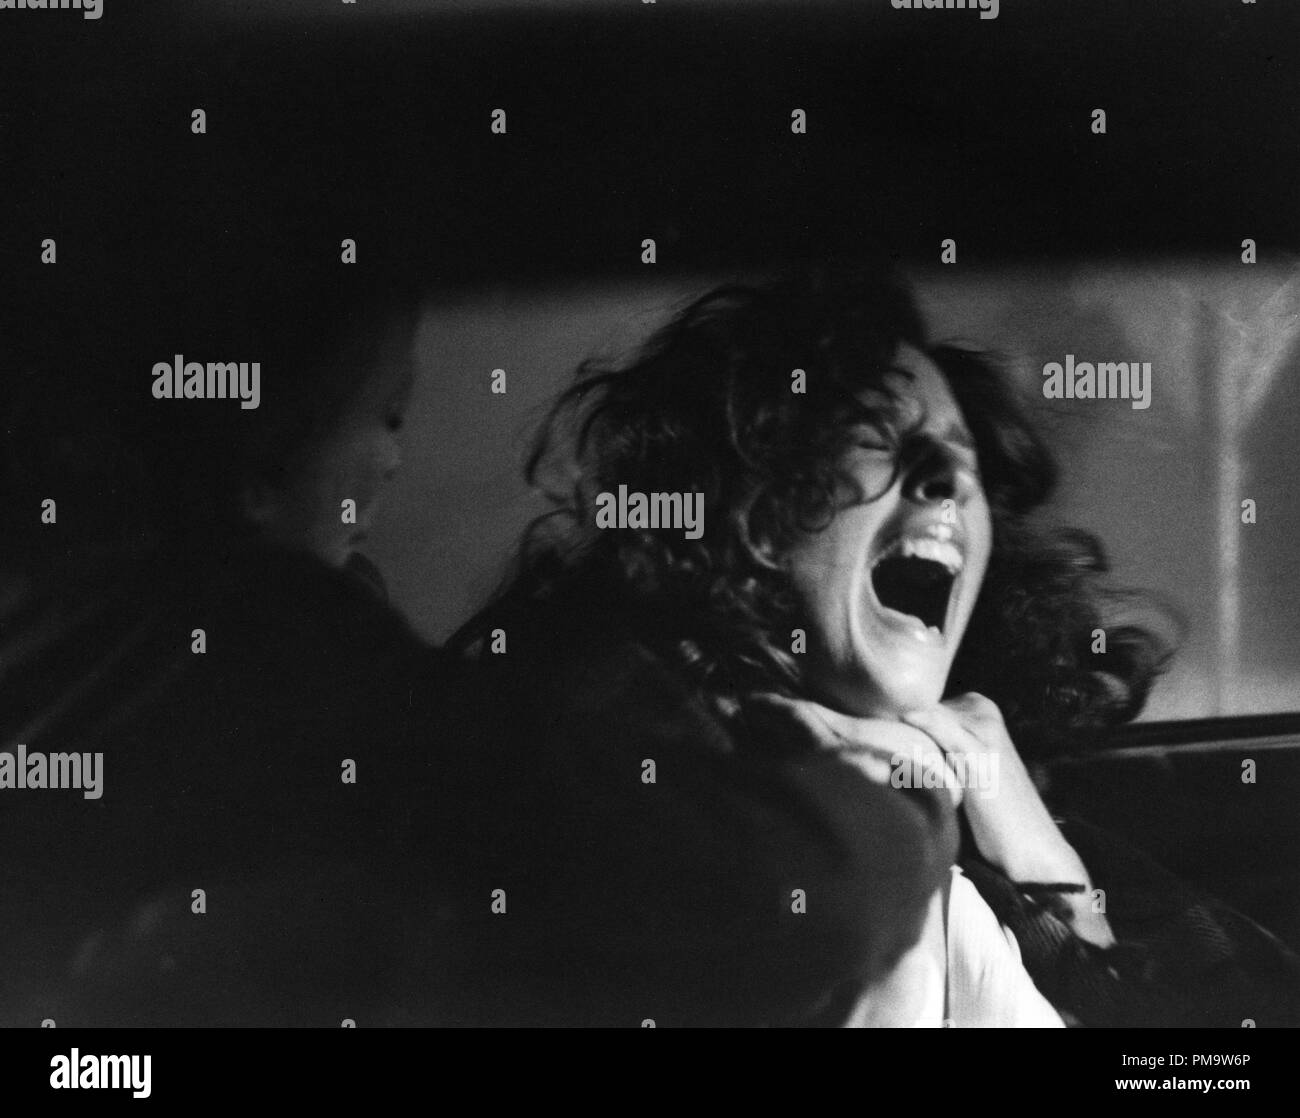 Studio Publicity Still From Halloween Nancy Loomis 1978 All Rights